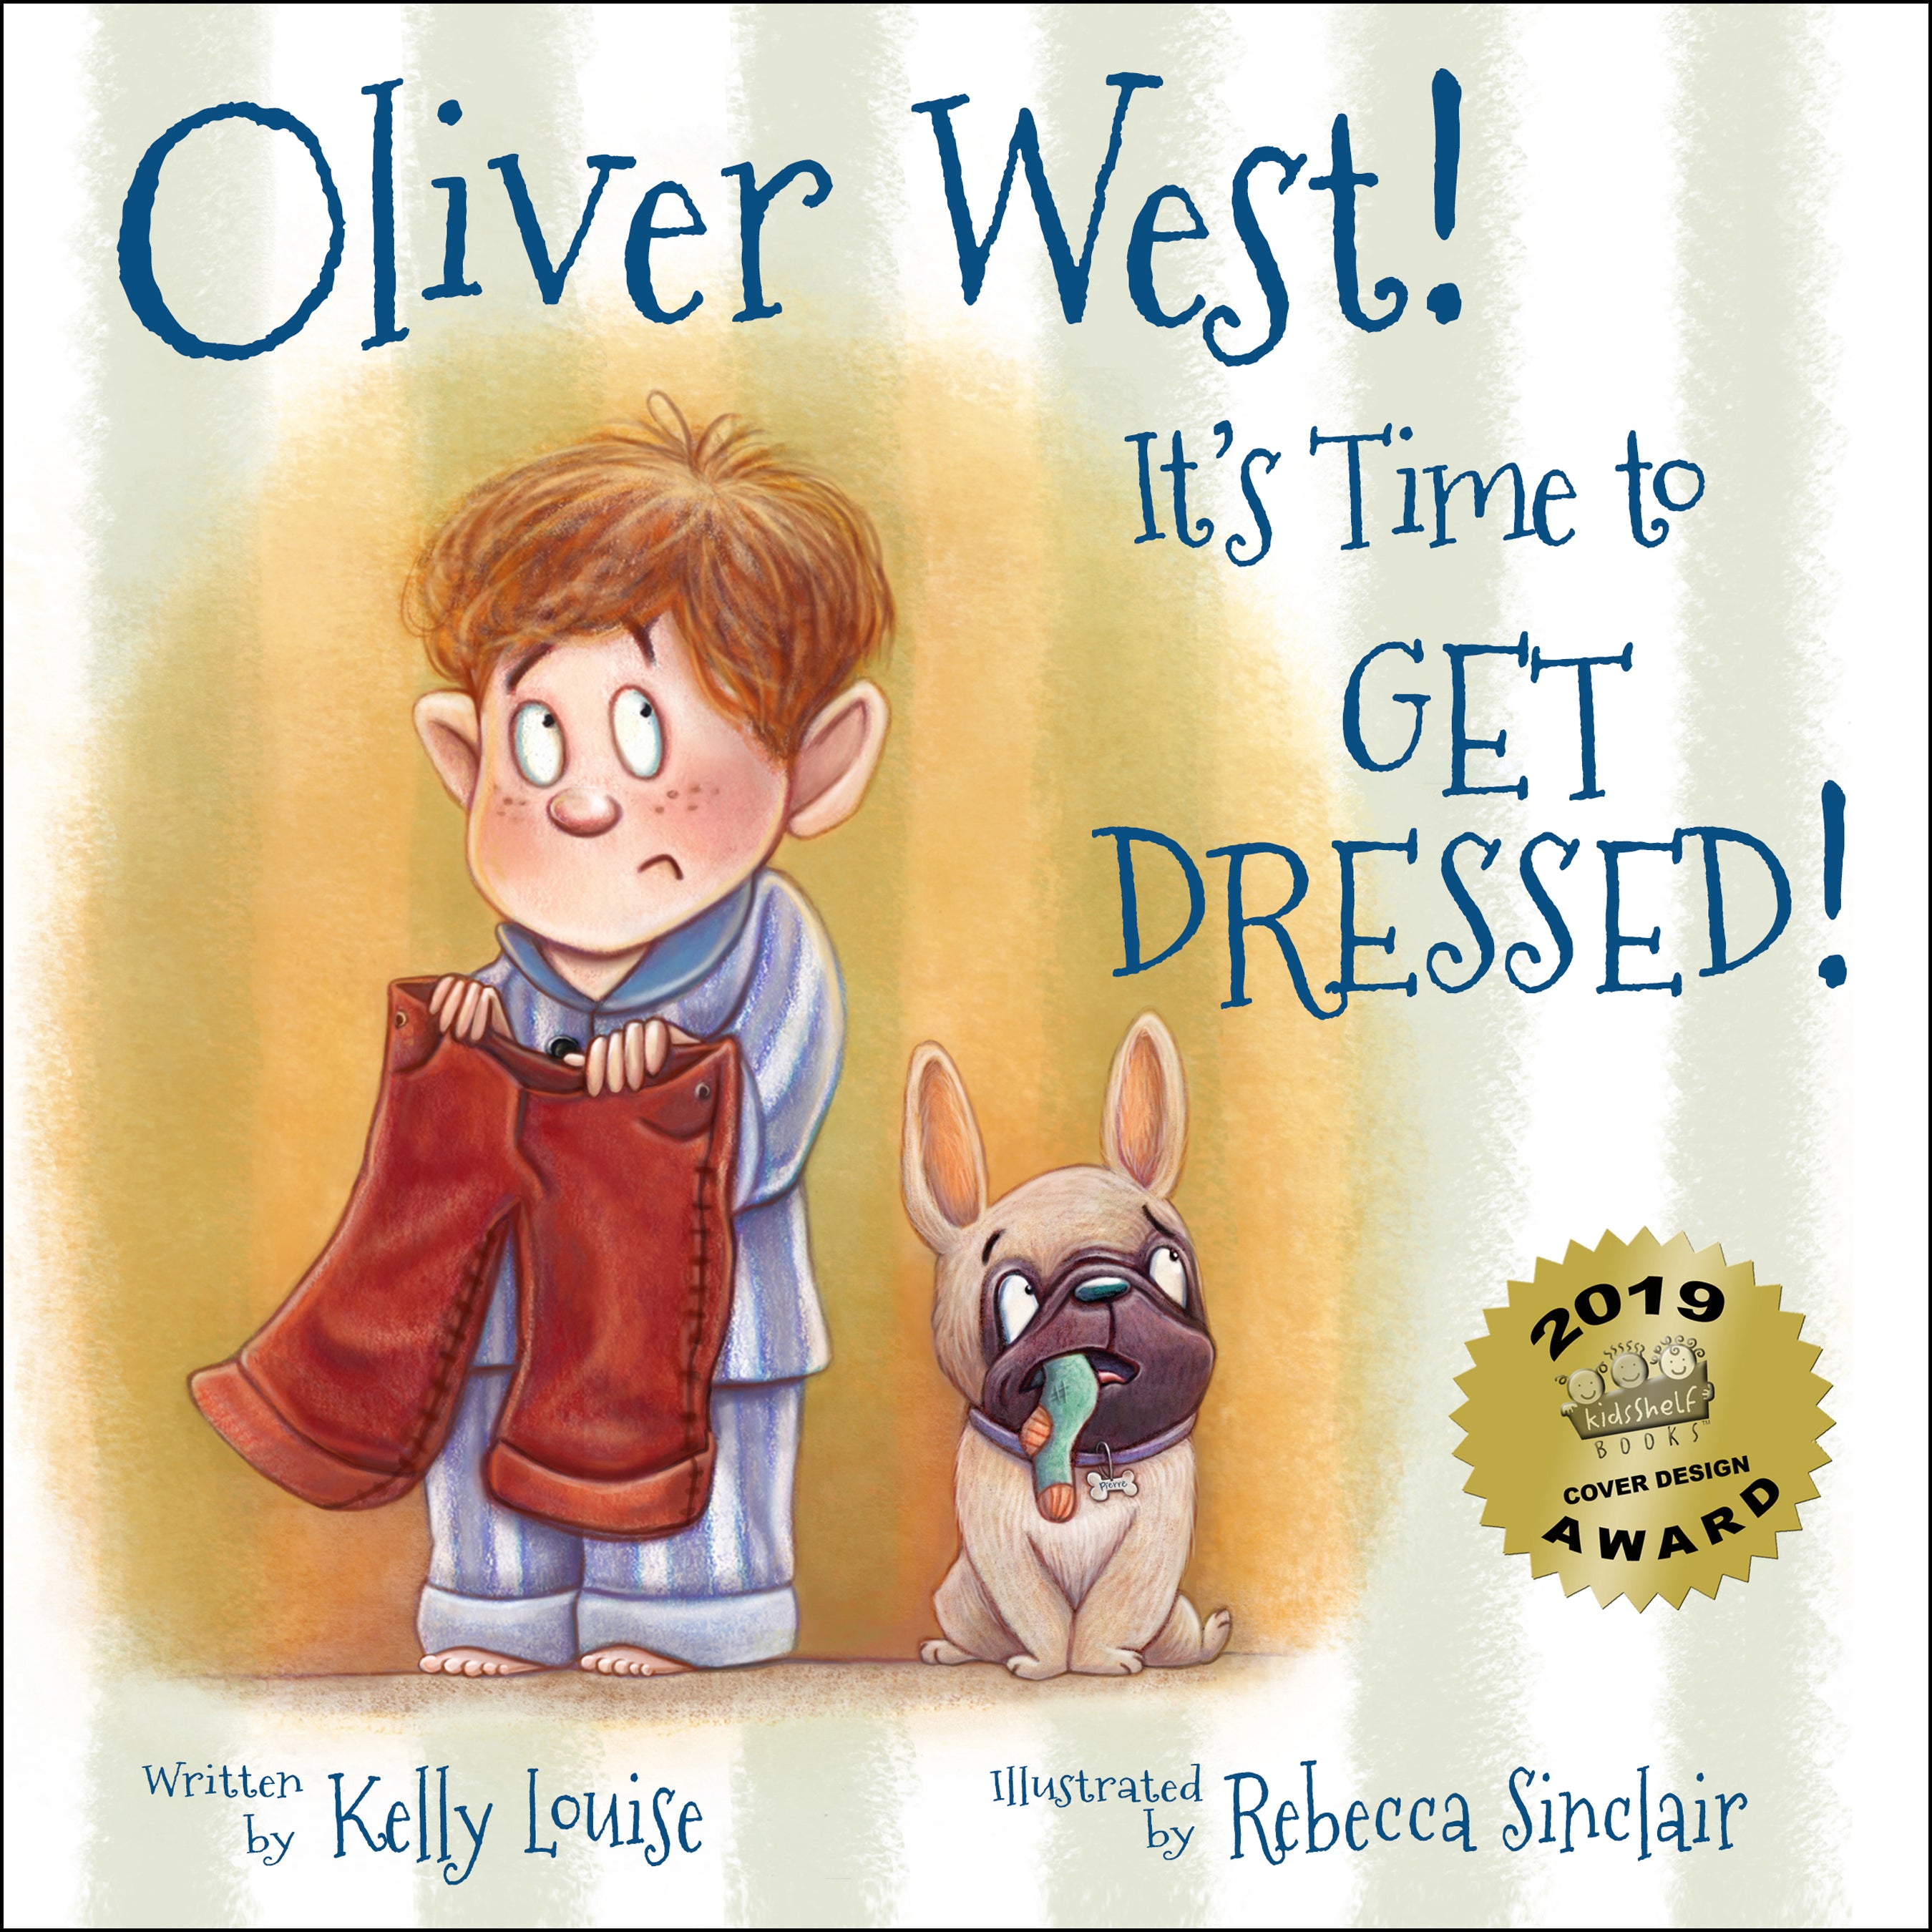 Oliver West! It's Time to Get Dressed!